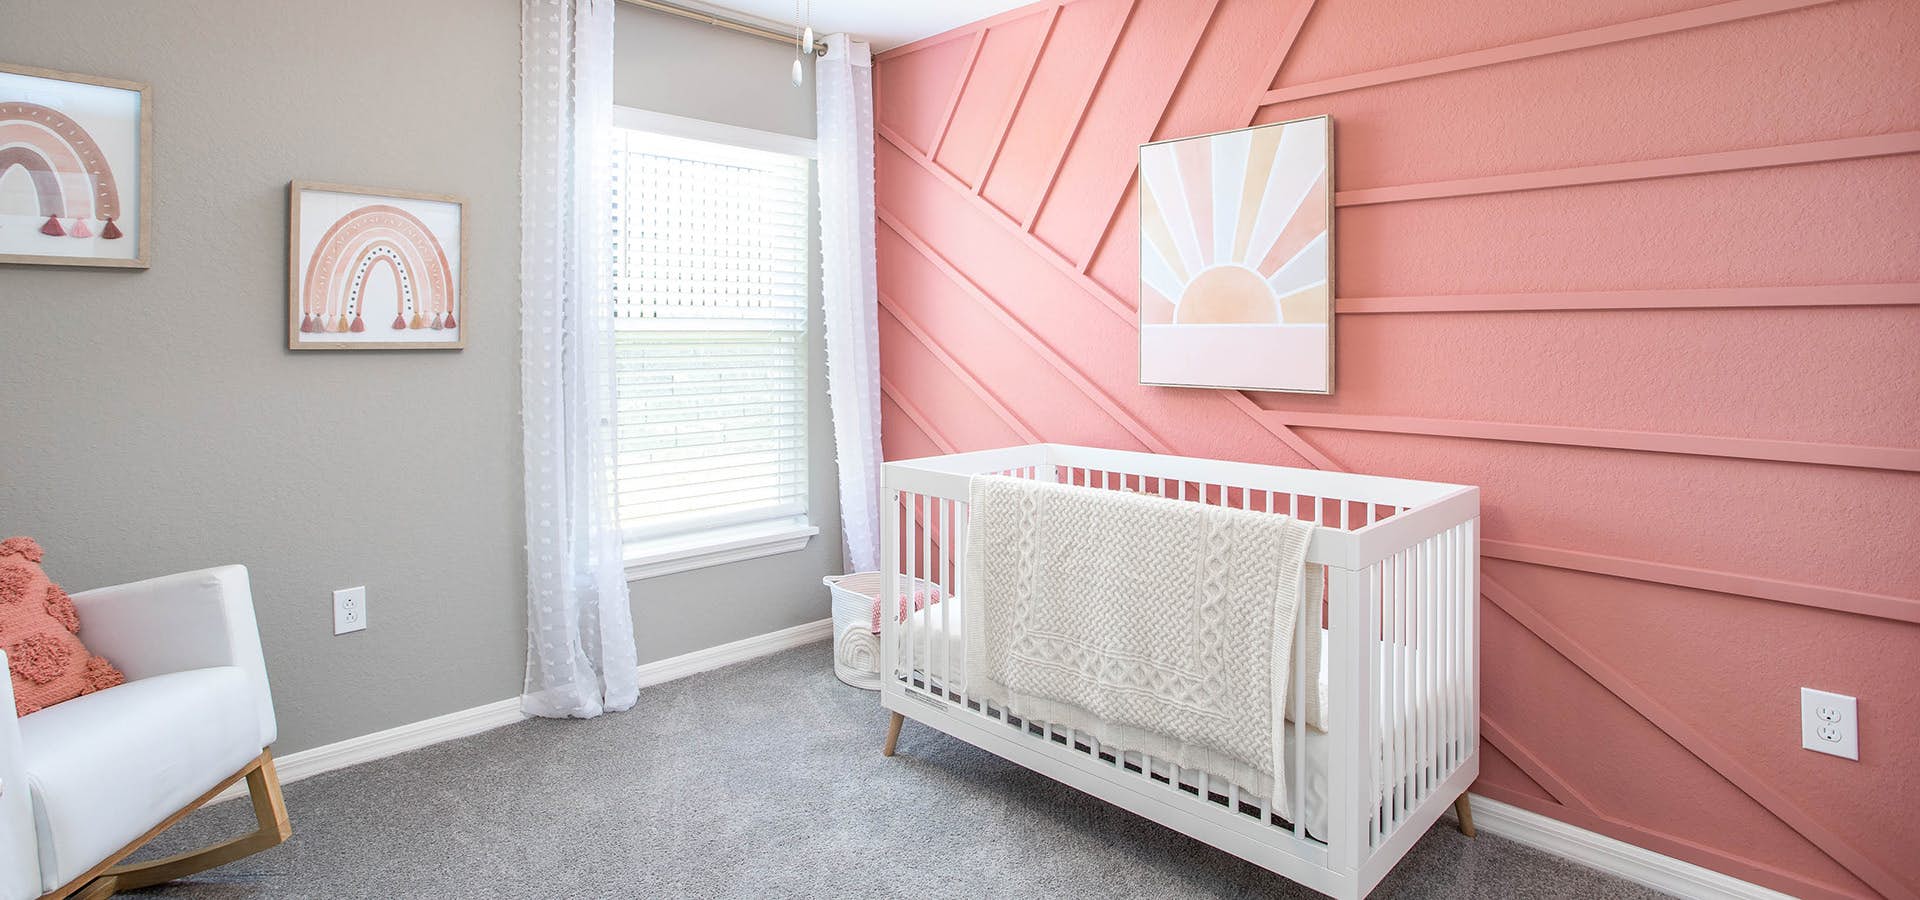 Nursery with a pink accent wall